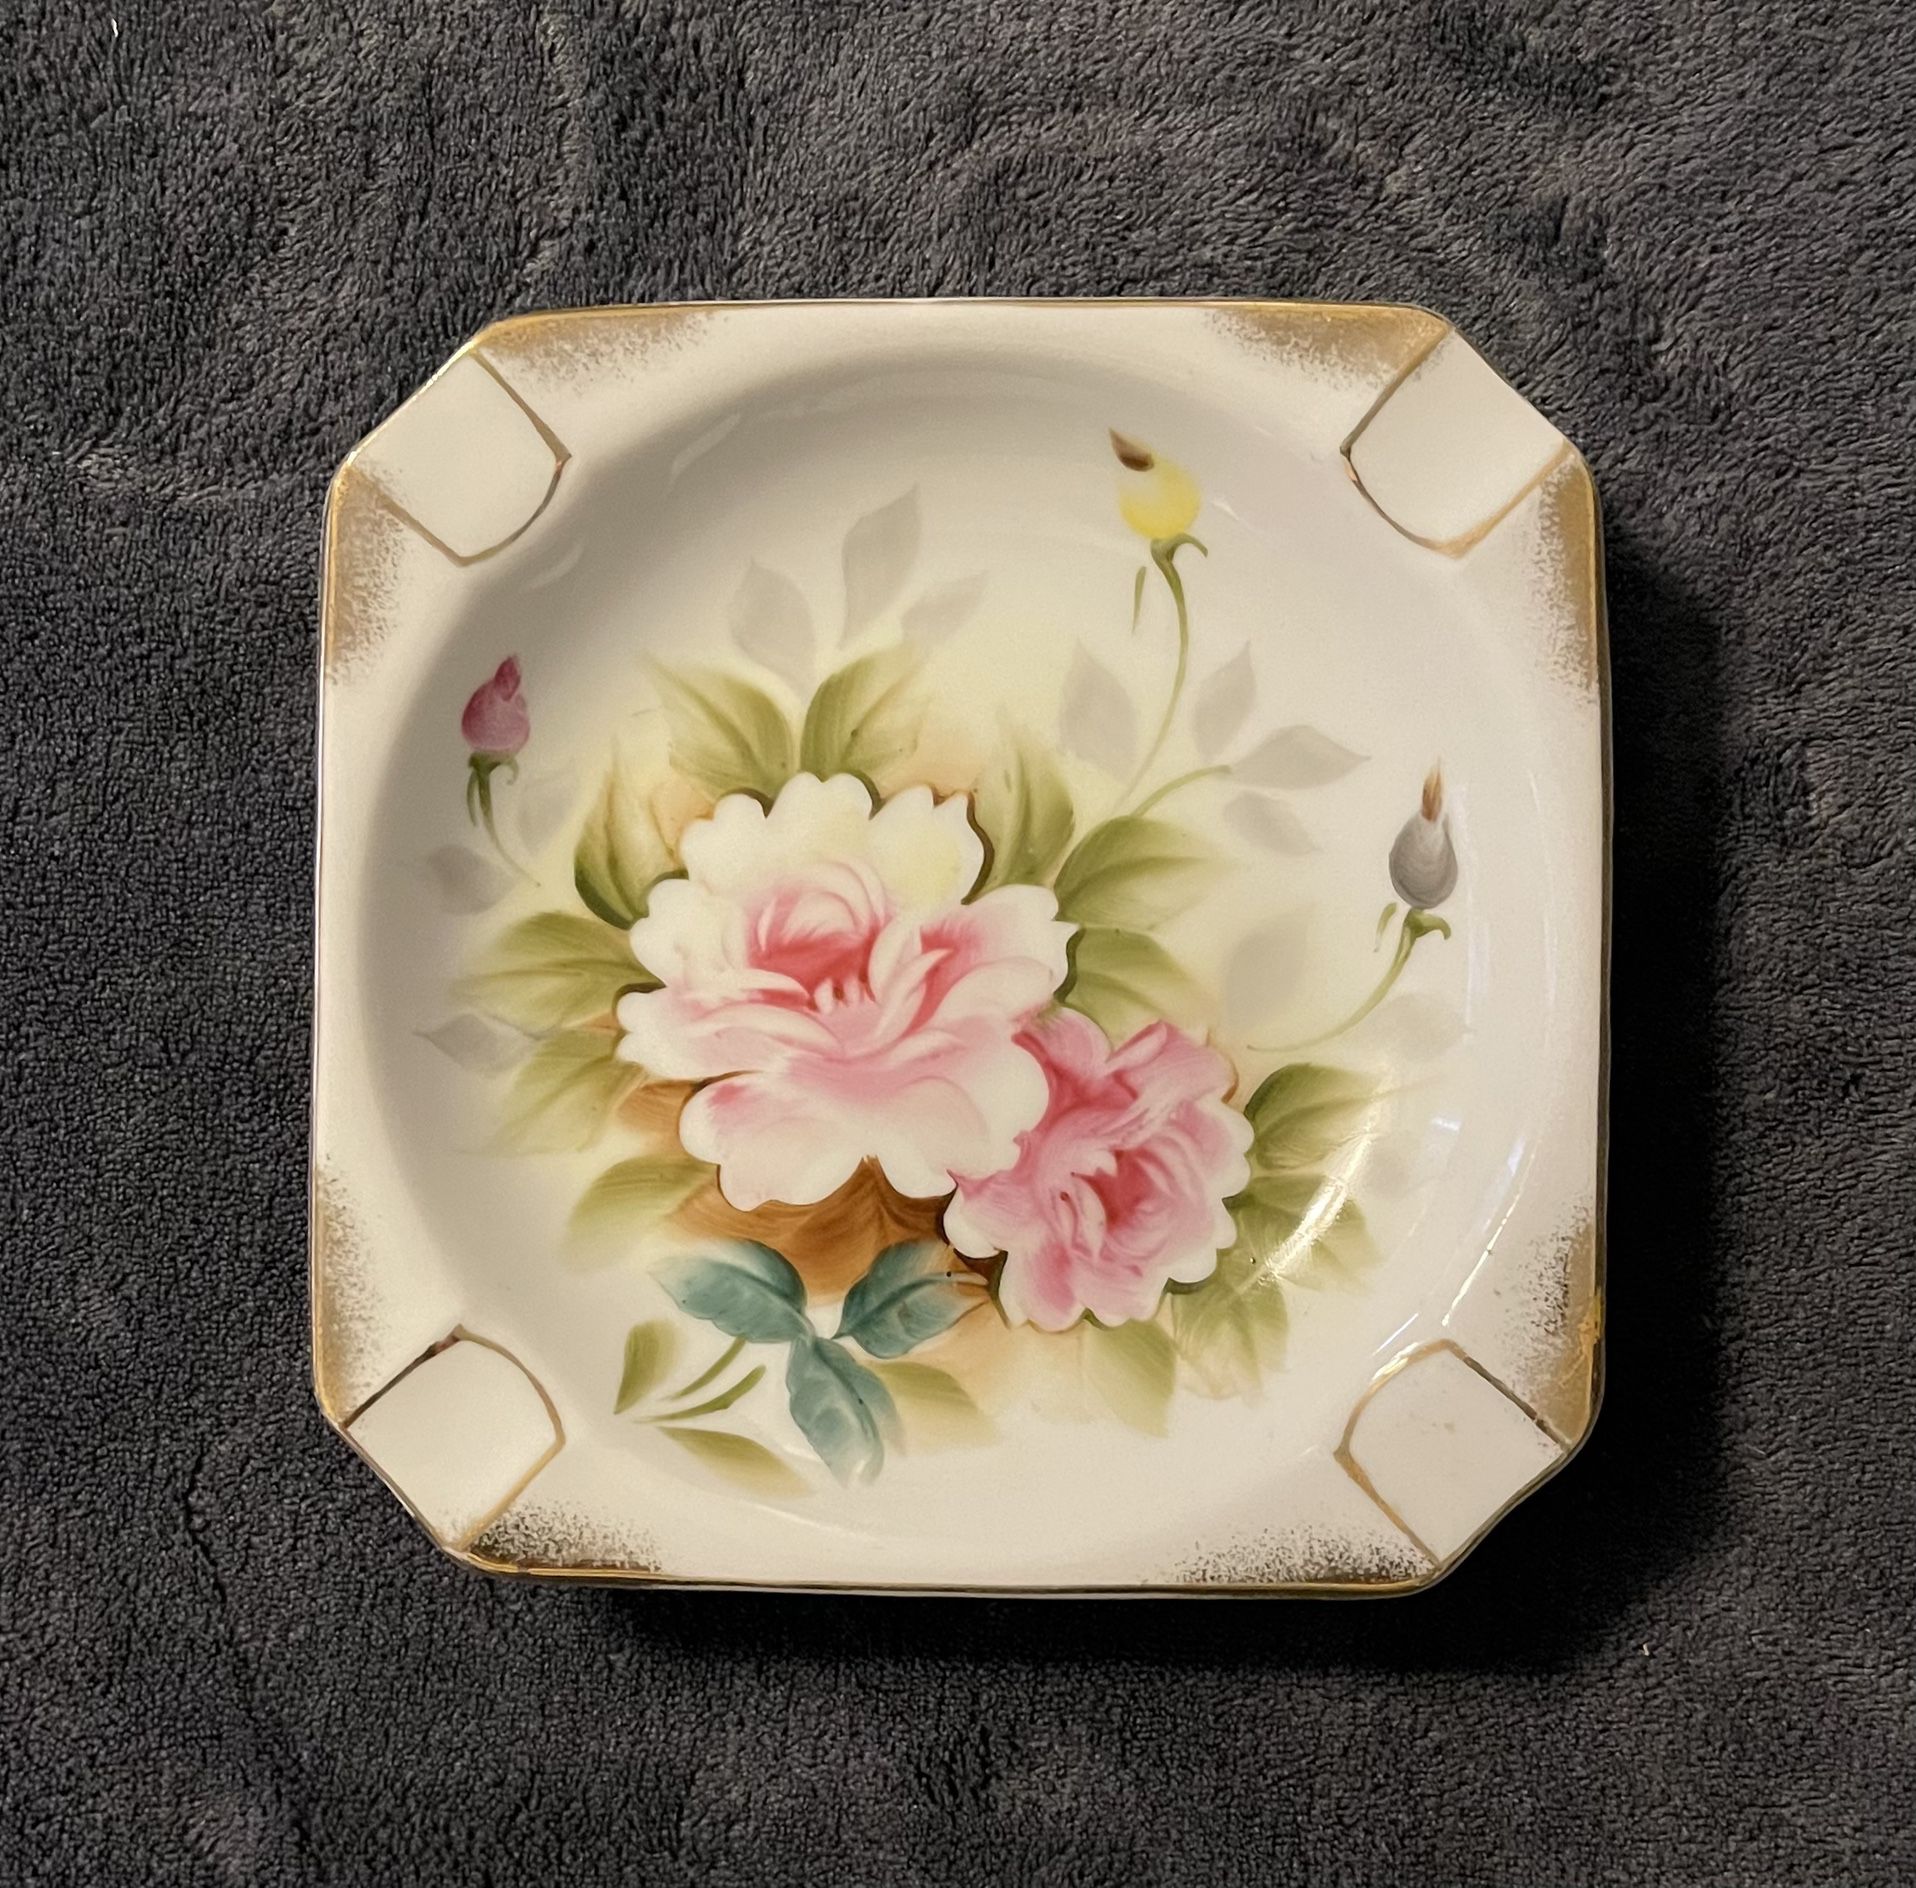 Beautiful Vintage Hand Painted Porcelain Ashtray With Pink Roses and Gold Trim.